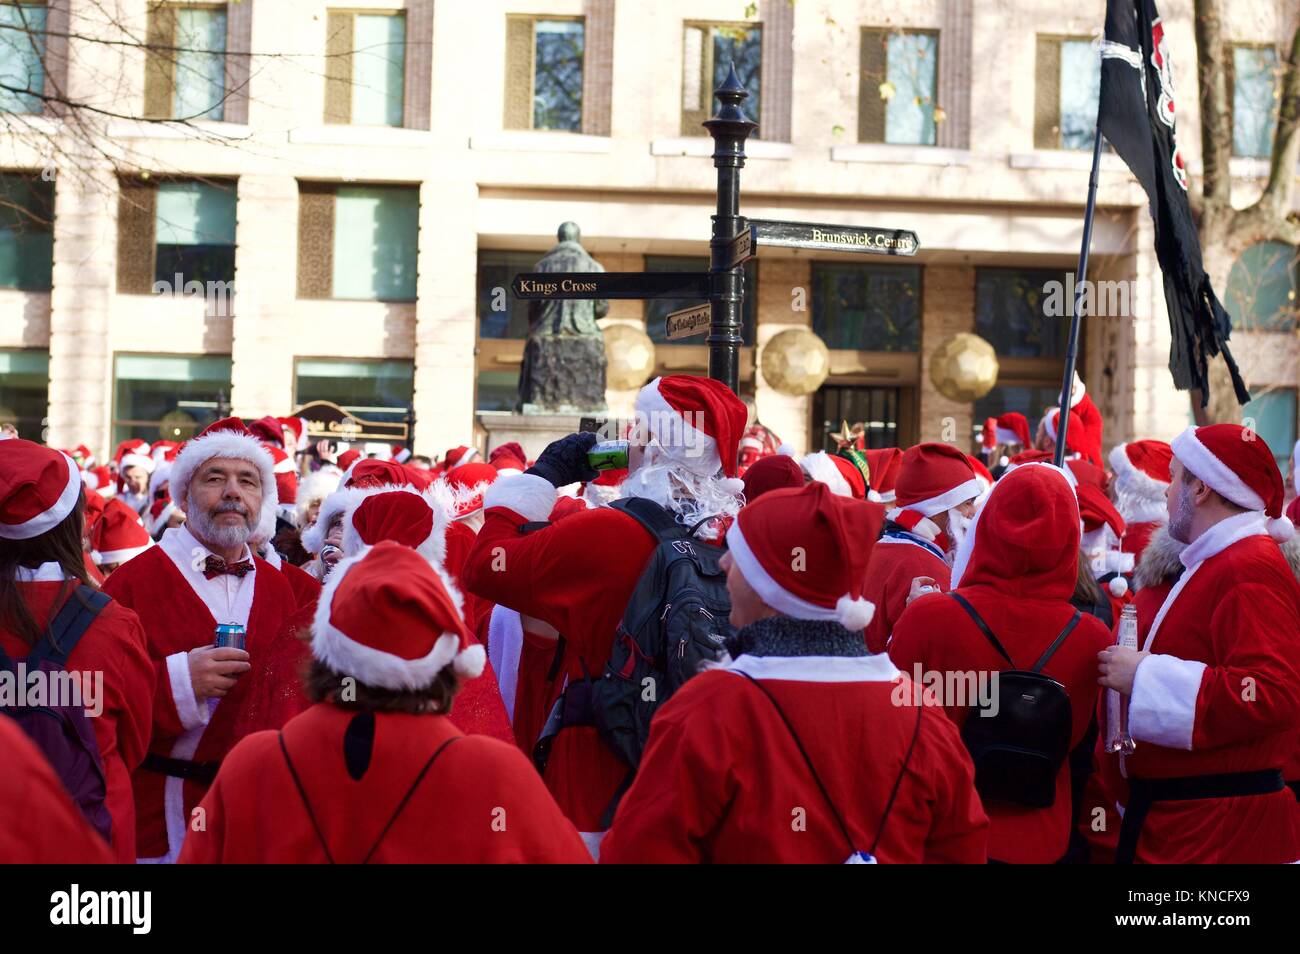 Flash mob dressed as Santa Claus walking through London, drinking and making merry for Santacon 2017 in North London, King's Cross area Stock Photo